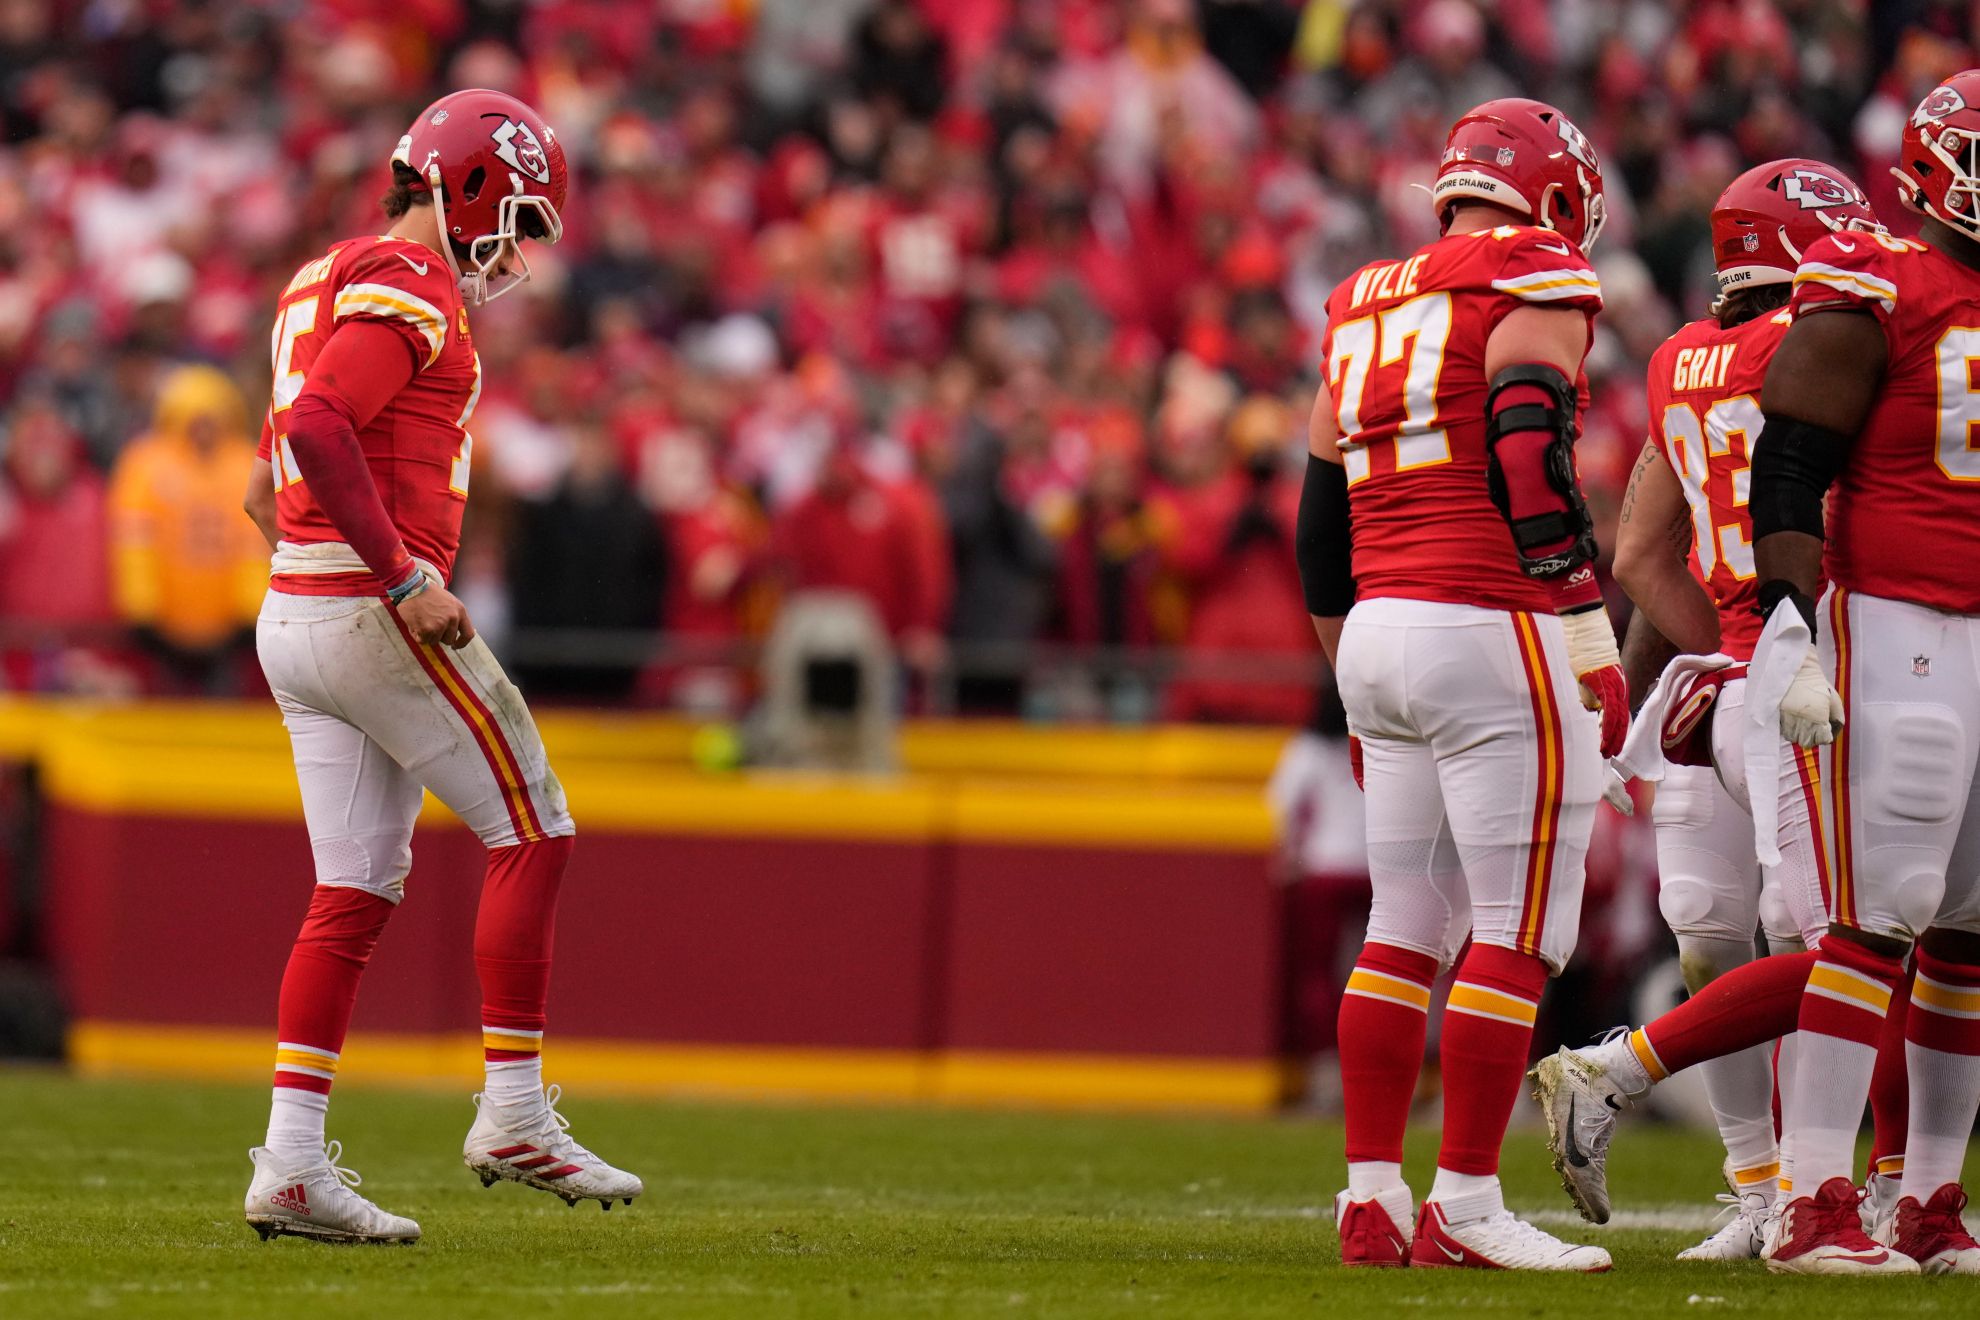 Patrick Mahomes injured his right ankle during the game against the Jaguars last Saturday.